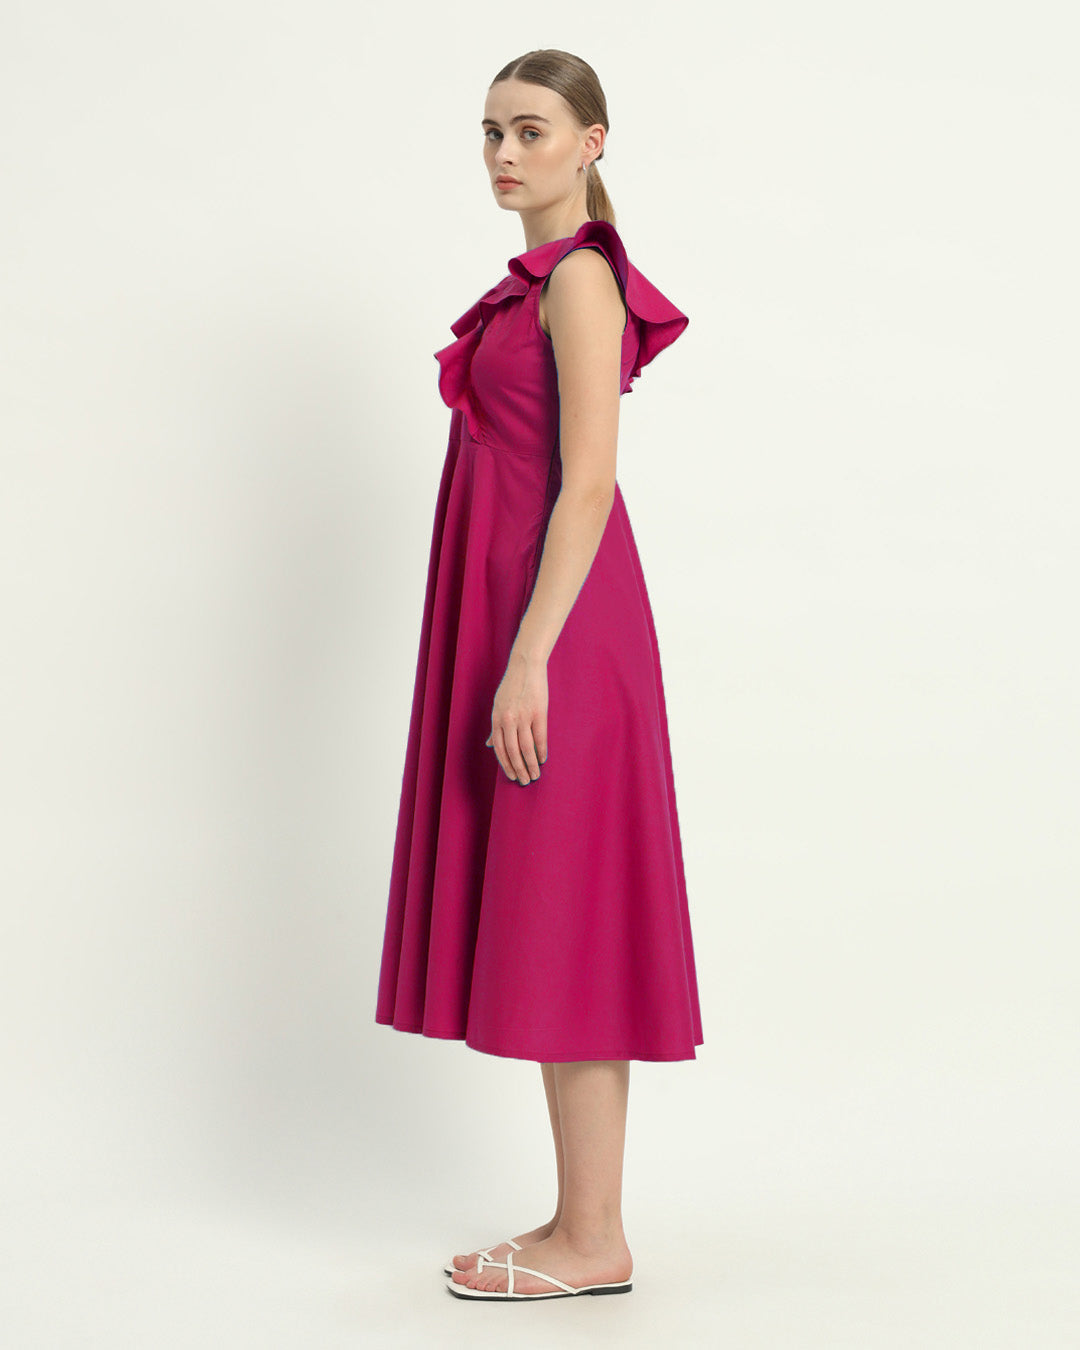 The Berry Albany Cotton Dress